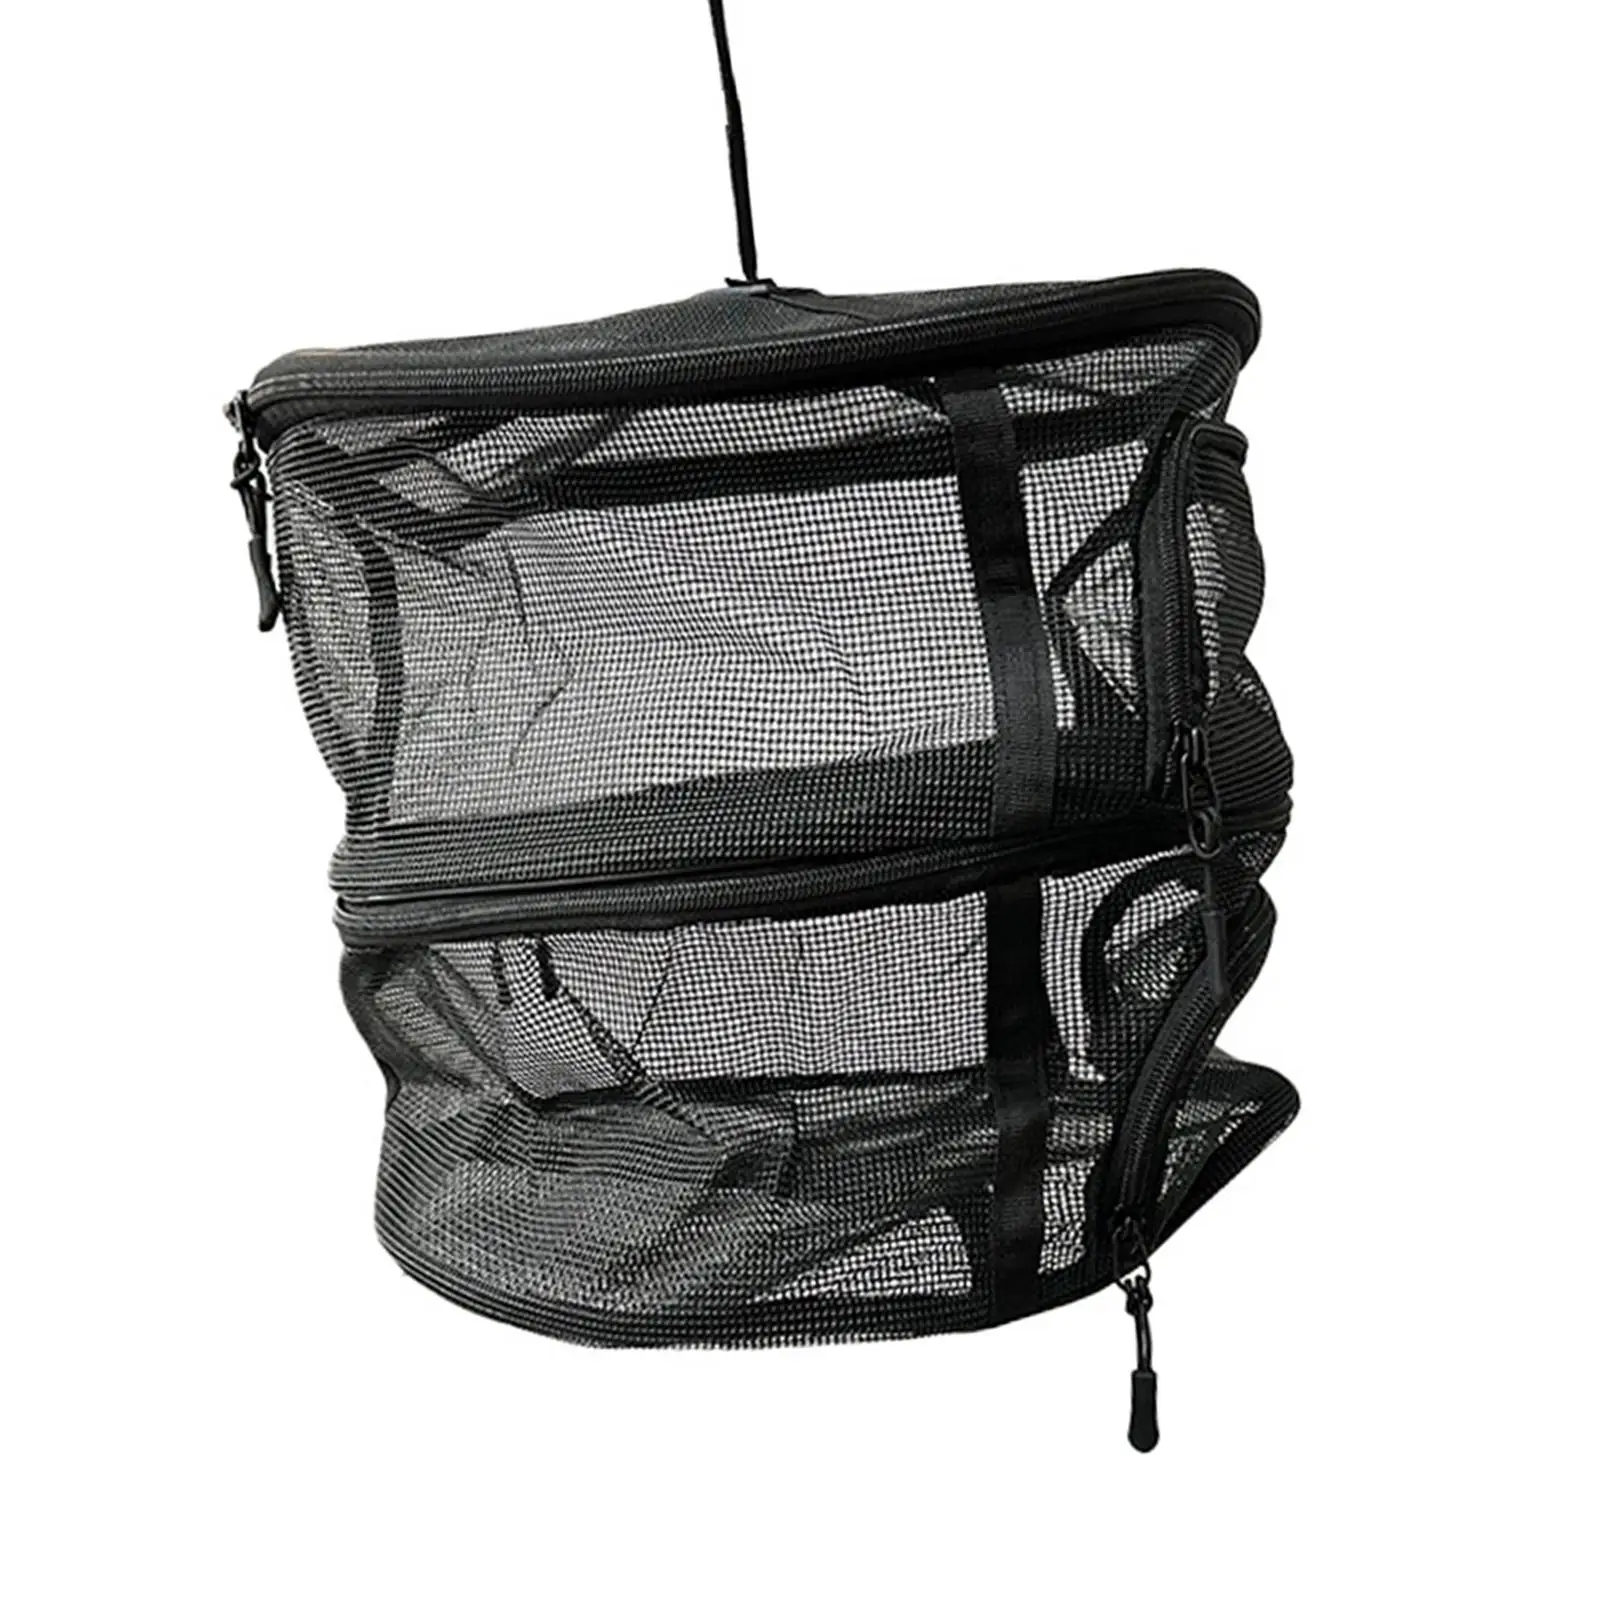 2 Layer Drying Rack, Foldable Hanging Mesh Drying Net, Hanging Mesh Net for Plants Seeds and Buds